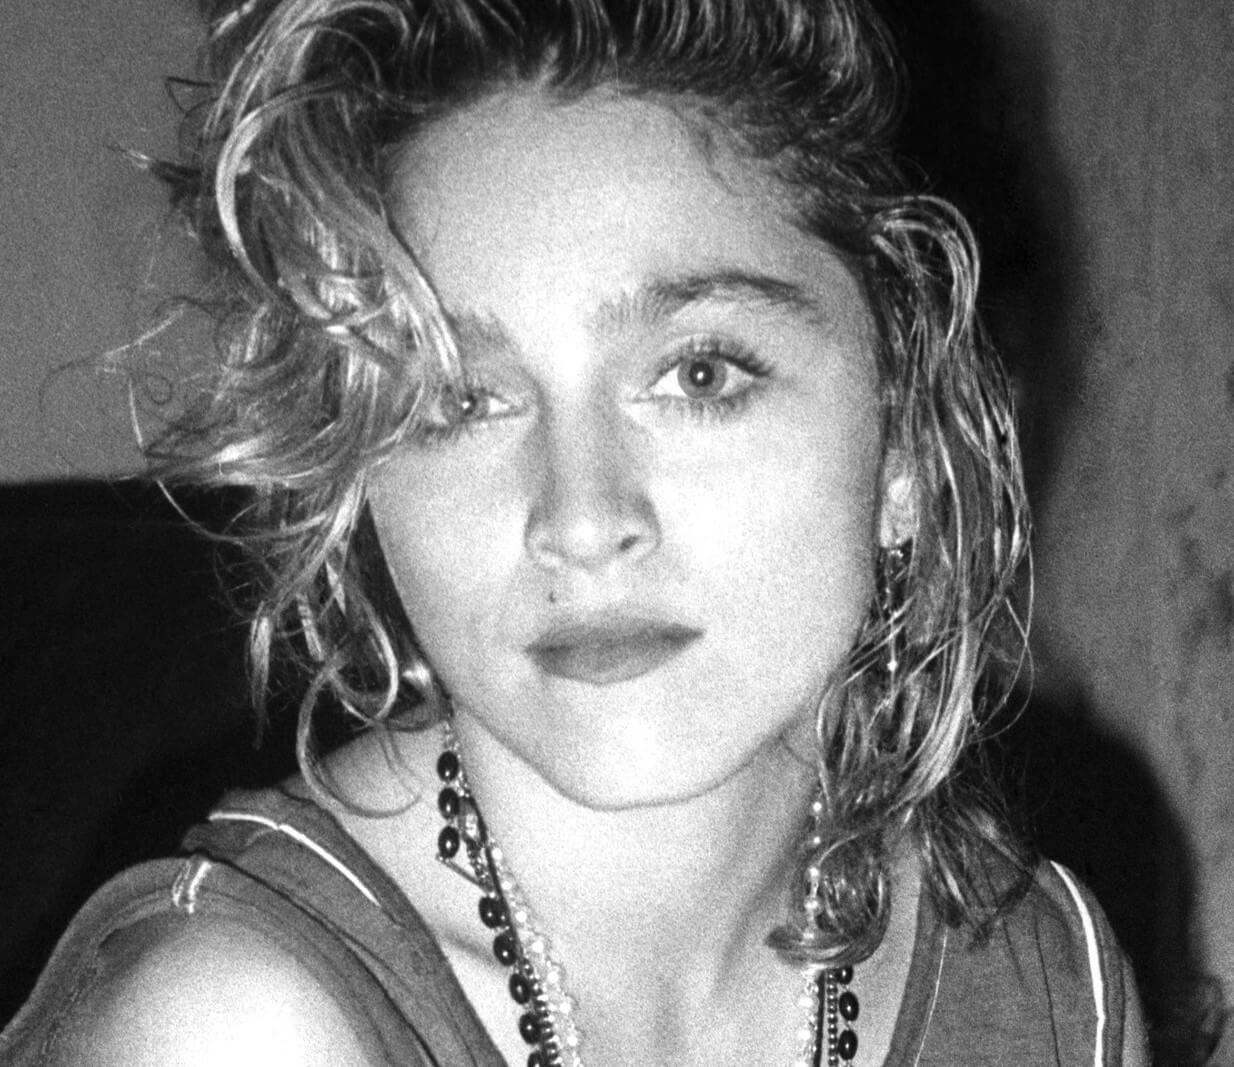 "Like a Virgin" star Madonna in black-and-white